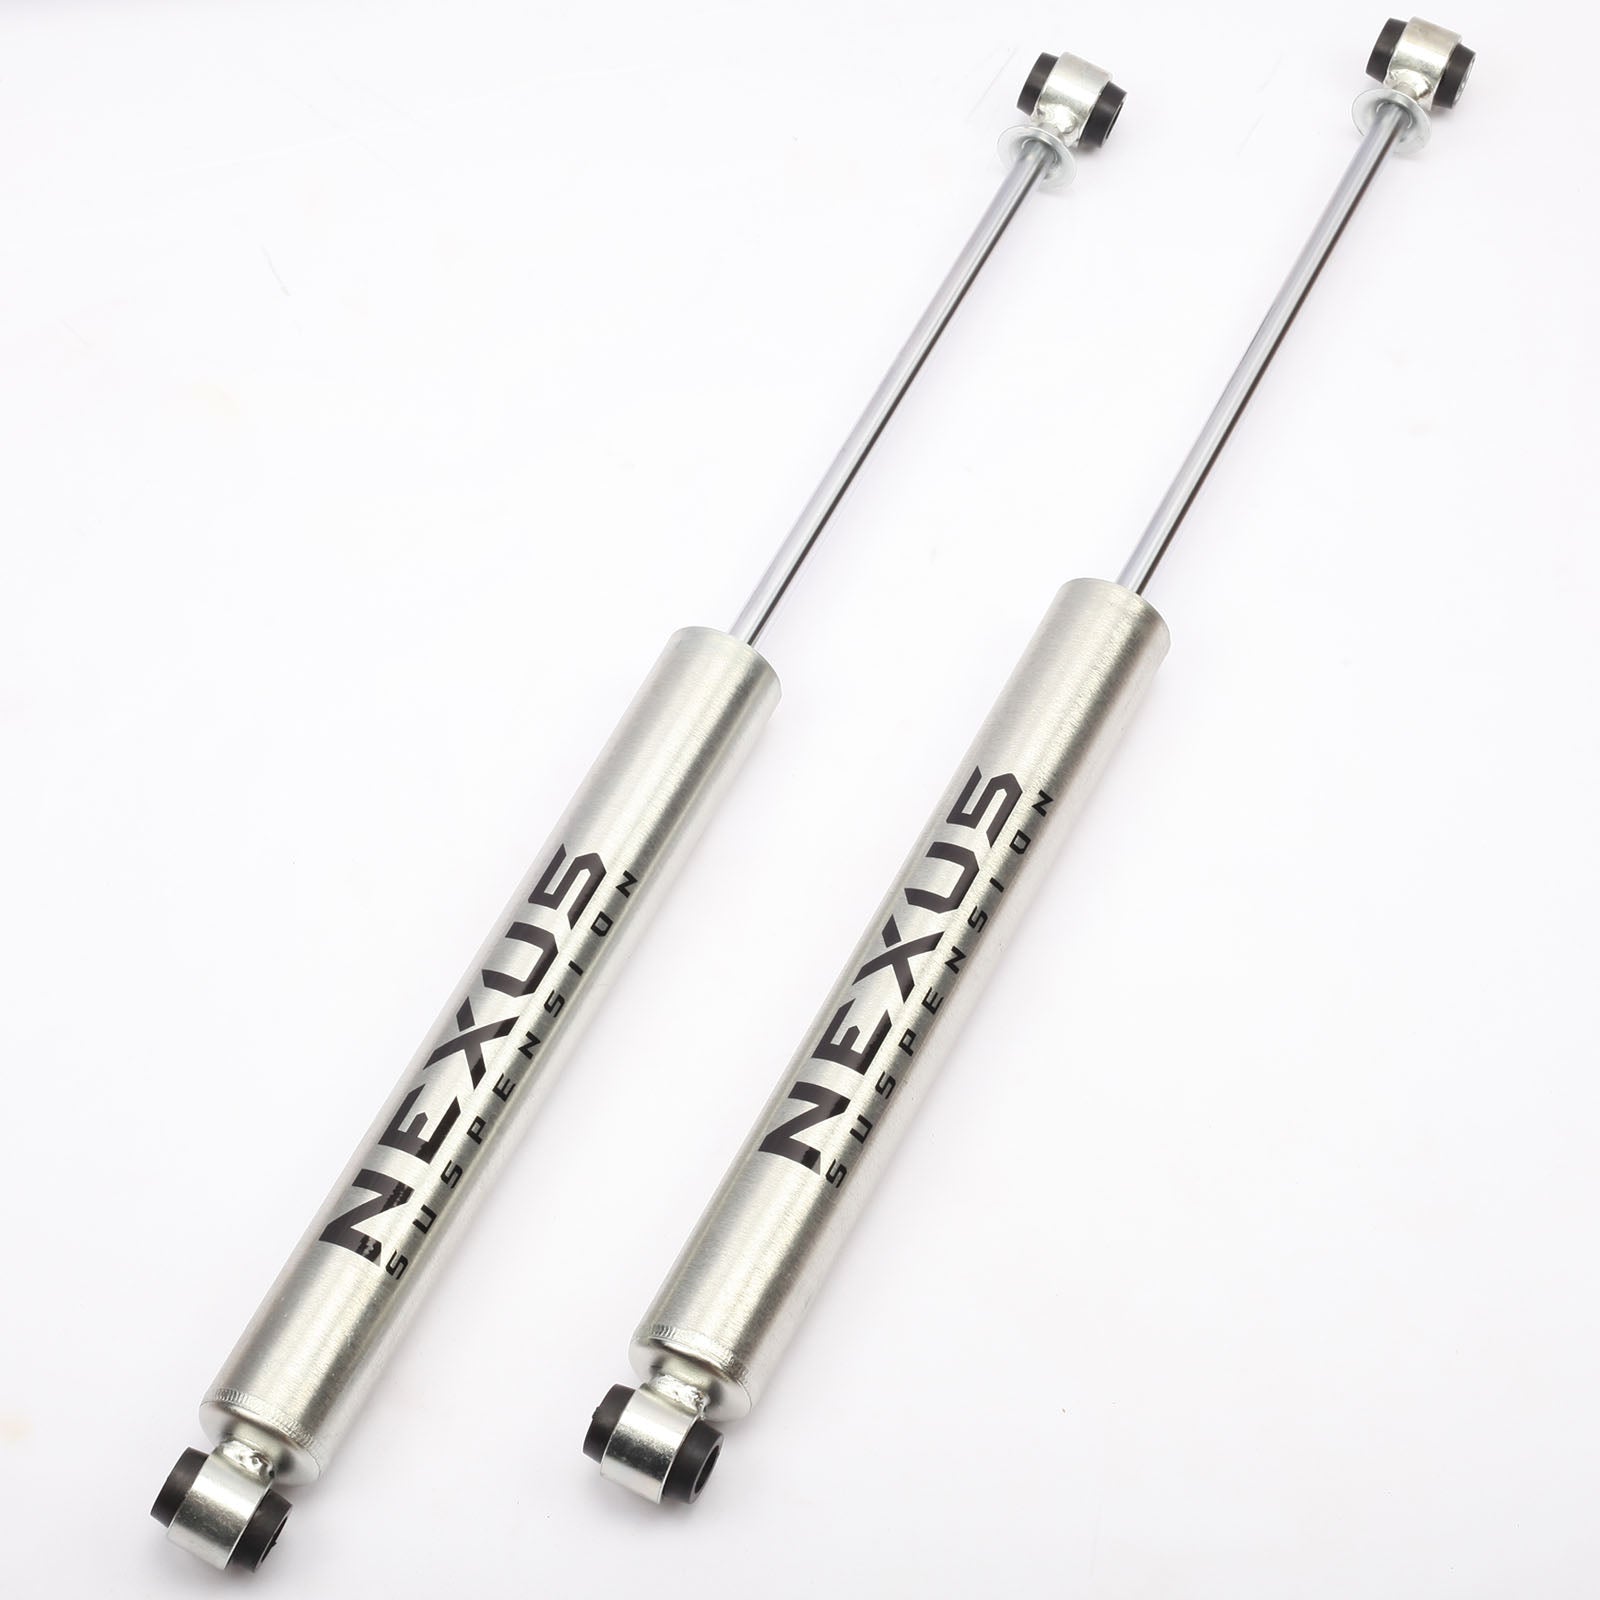 NEXUS SUSPENSION 6Inch Lift Rear Shock Absorber for 2000-2012 Chevrolet Suburban 1500 4WD,Zinc Plated Coating,Pair Pack